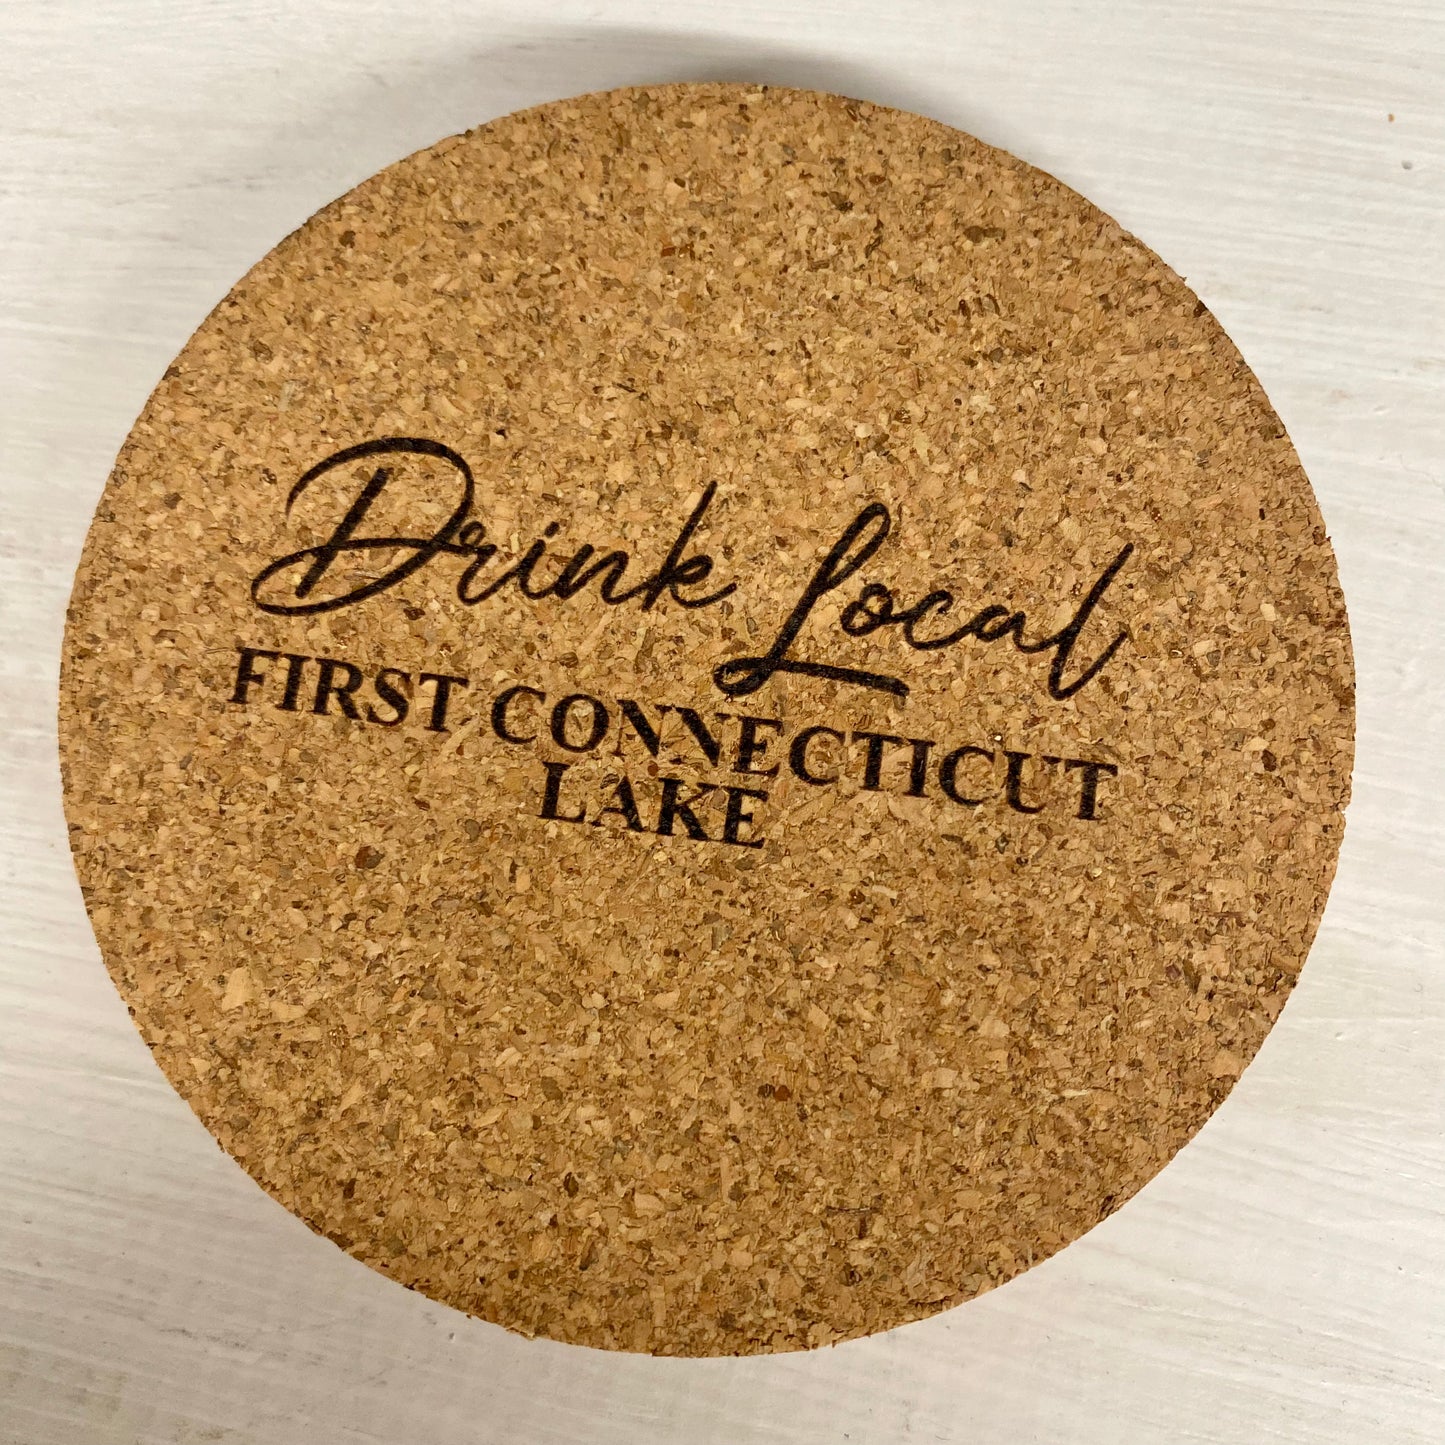 Drink Local First Connecticut Lake Cork Coaster